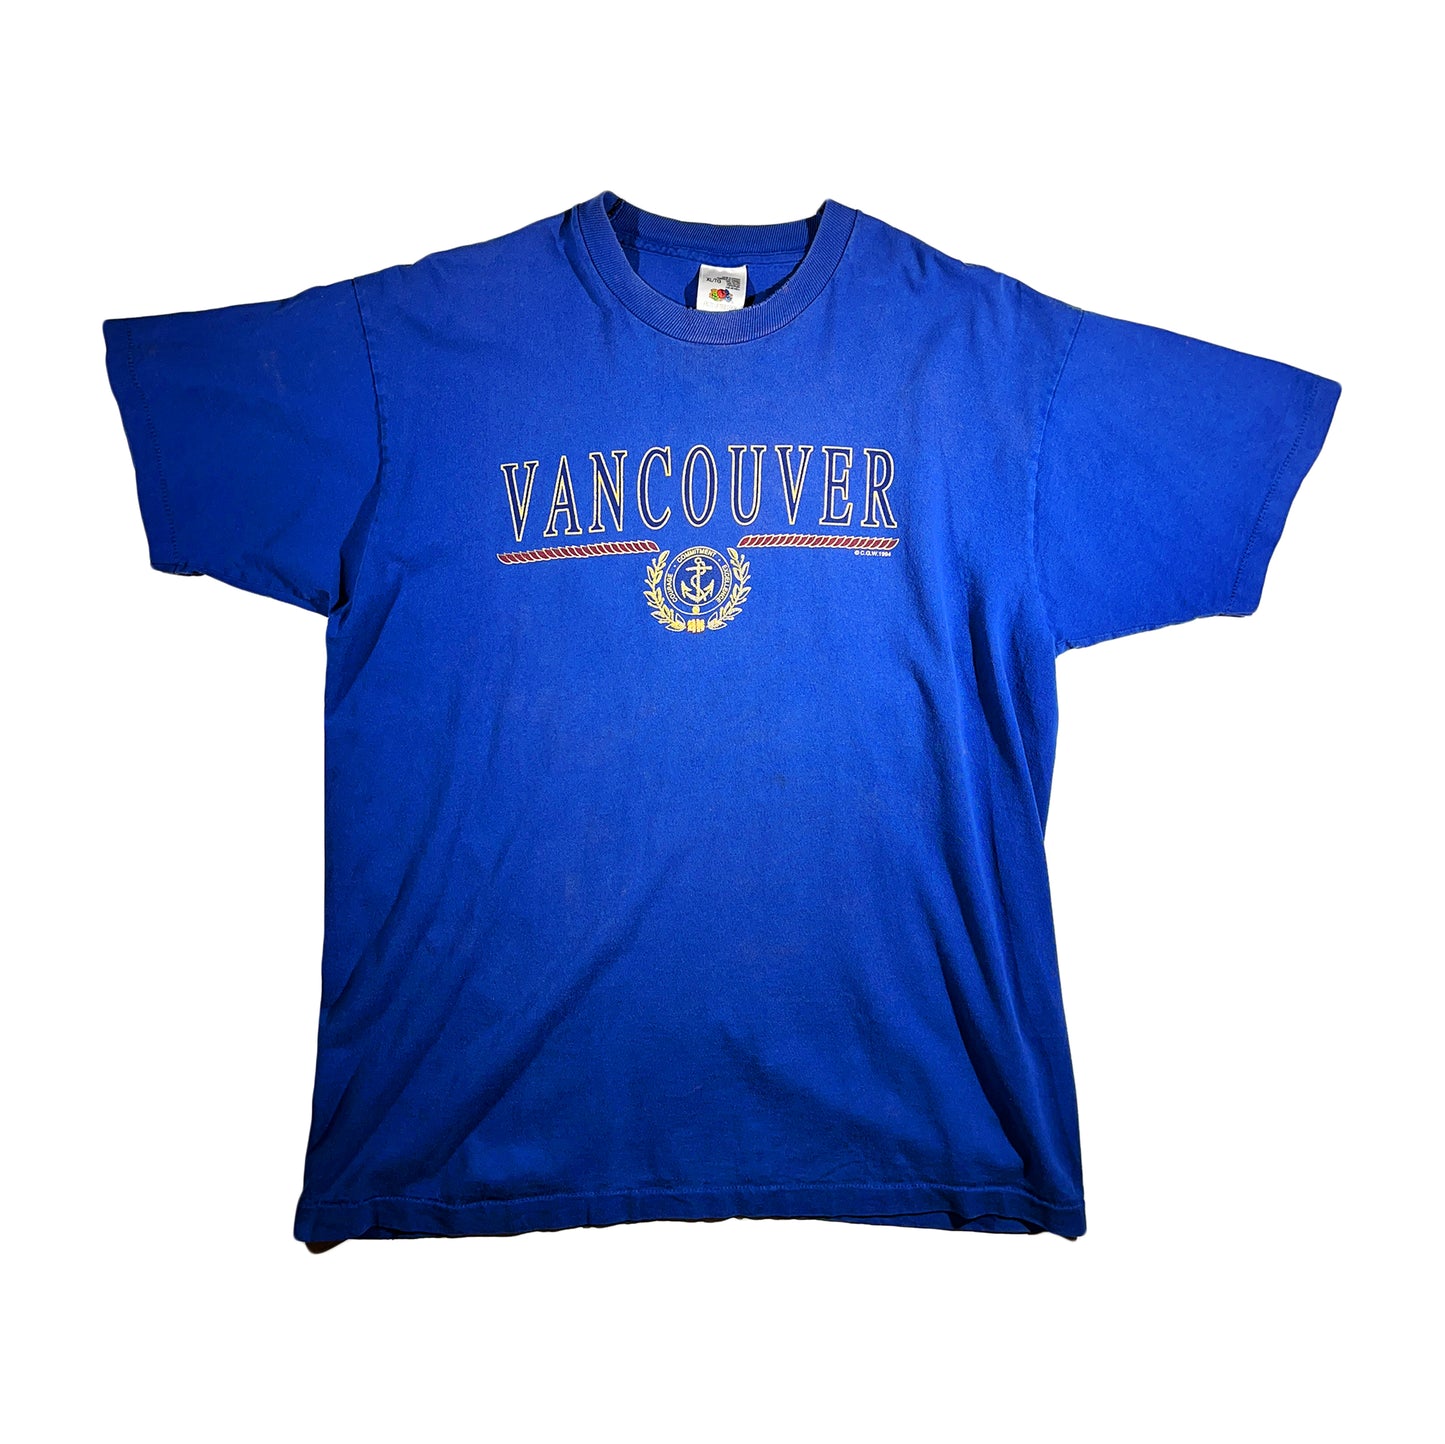 Vintage Vancouver T-Shirt 90's Made In Canada Tourist Tee